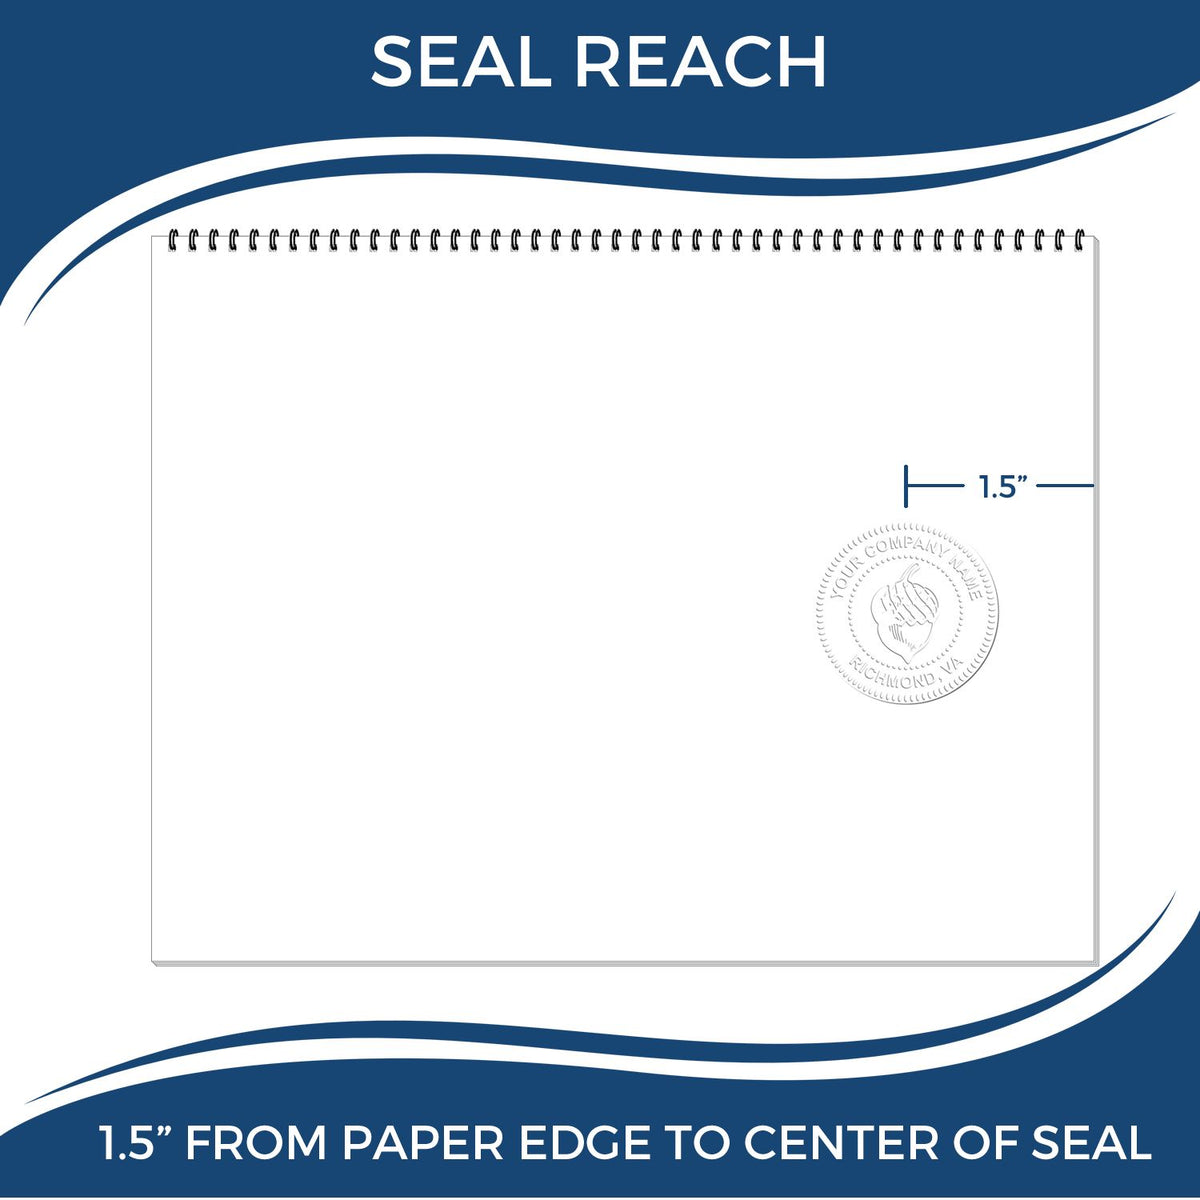 An infographic showing the seal reach which is represented by a ruler and a miniature seal image of the State of Idaho Soft Land Surveyor Embossing Seal